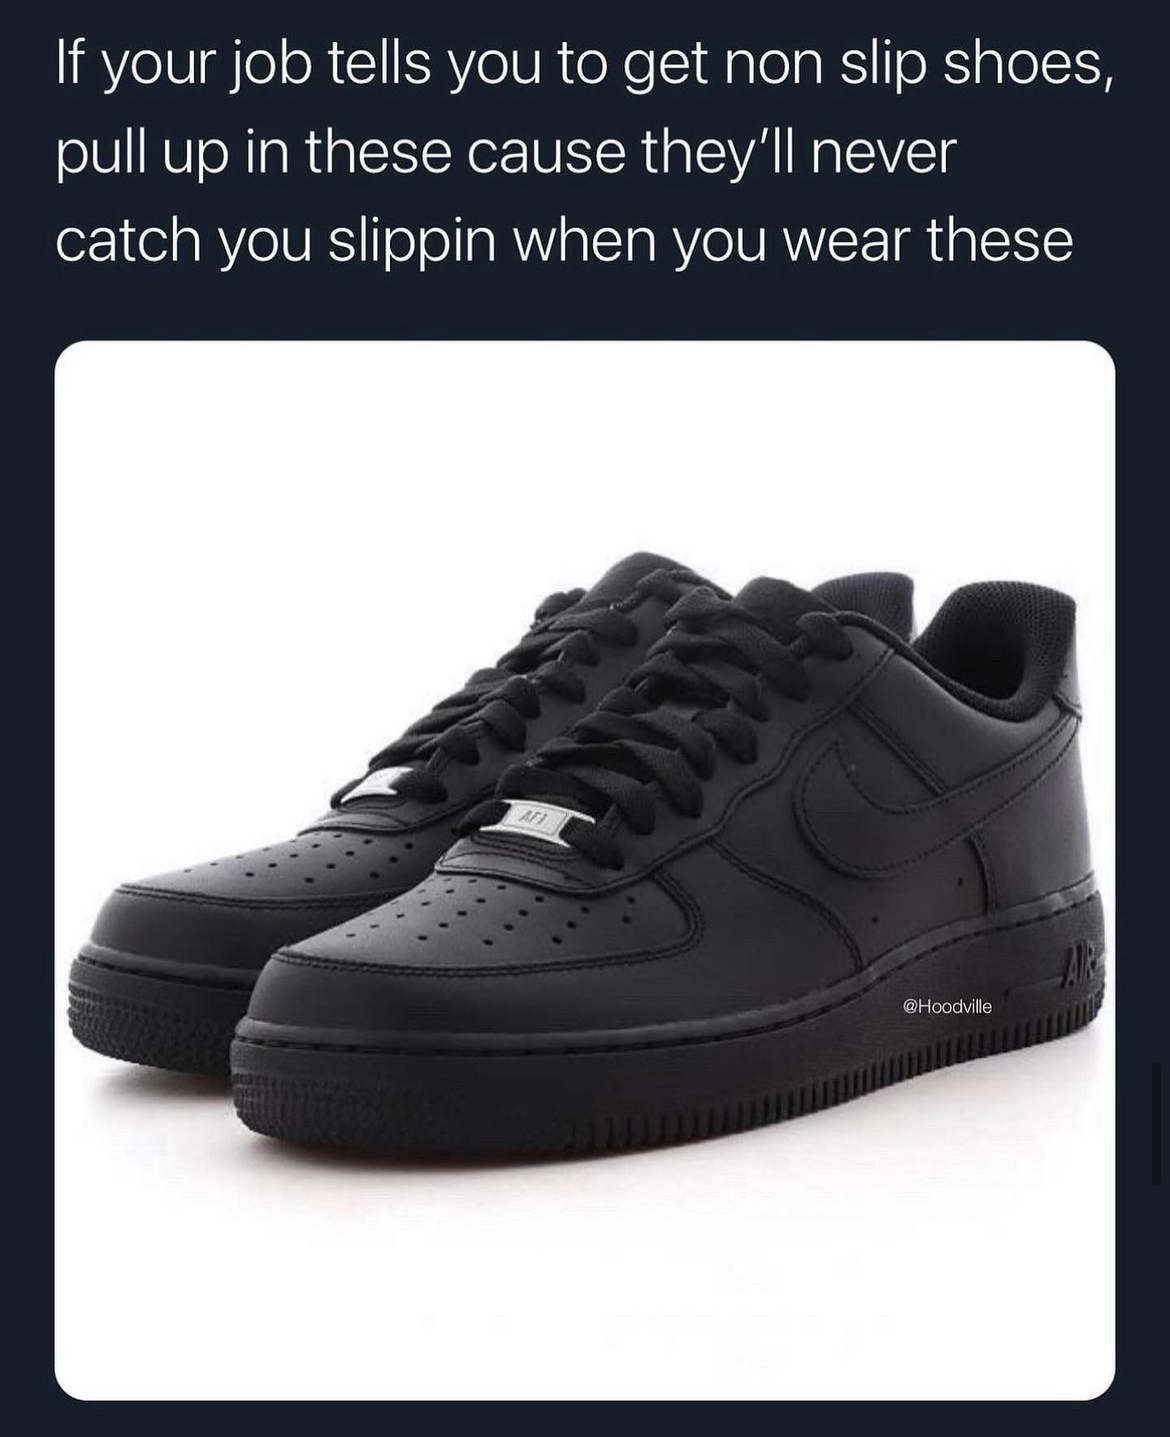 Hoodville memes and captions - air force 1 black - If your job tells you to get non slip shoes, pull up in these cause they'll never catch you slippin when you wear these Hood